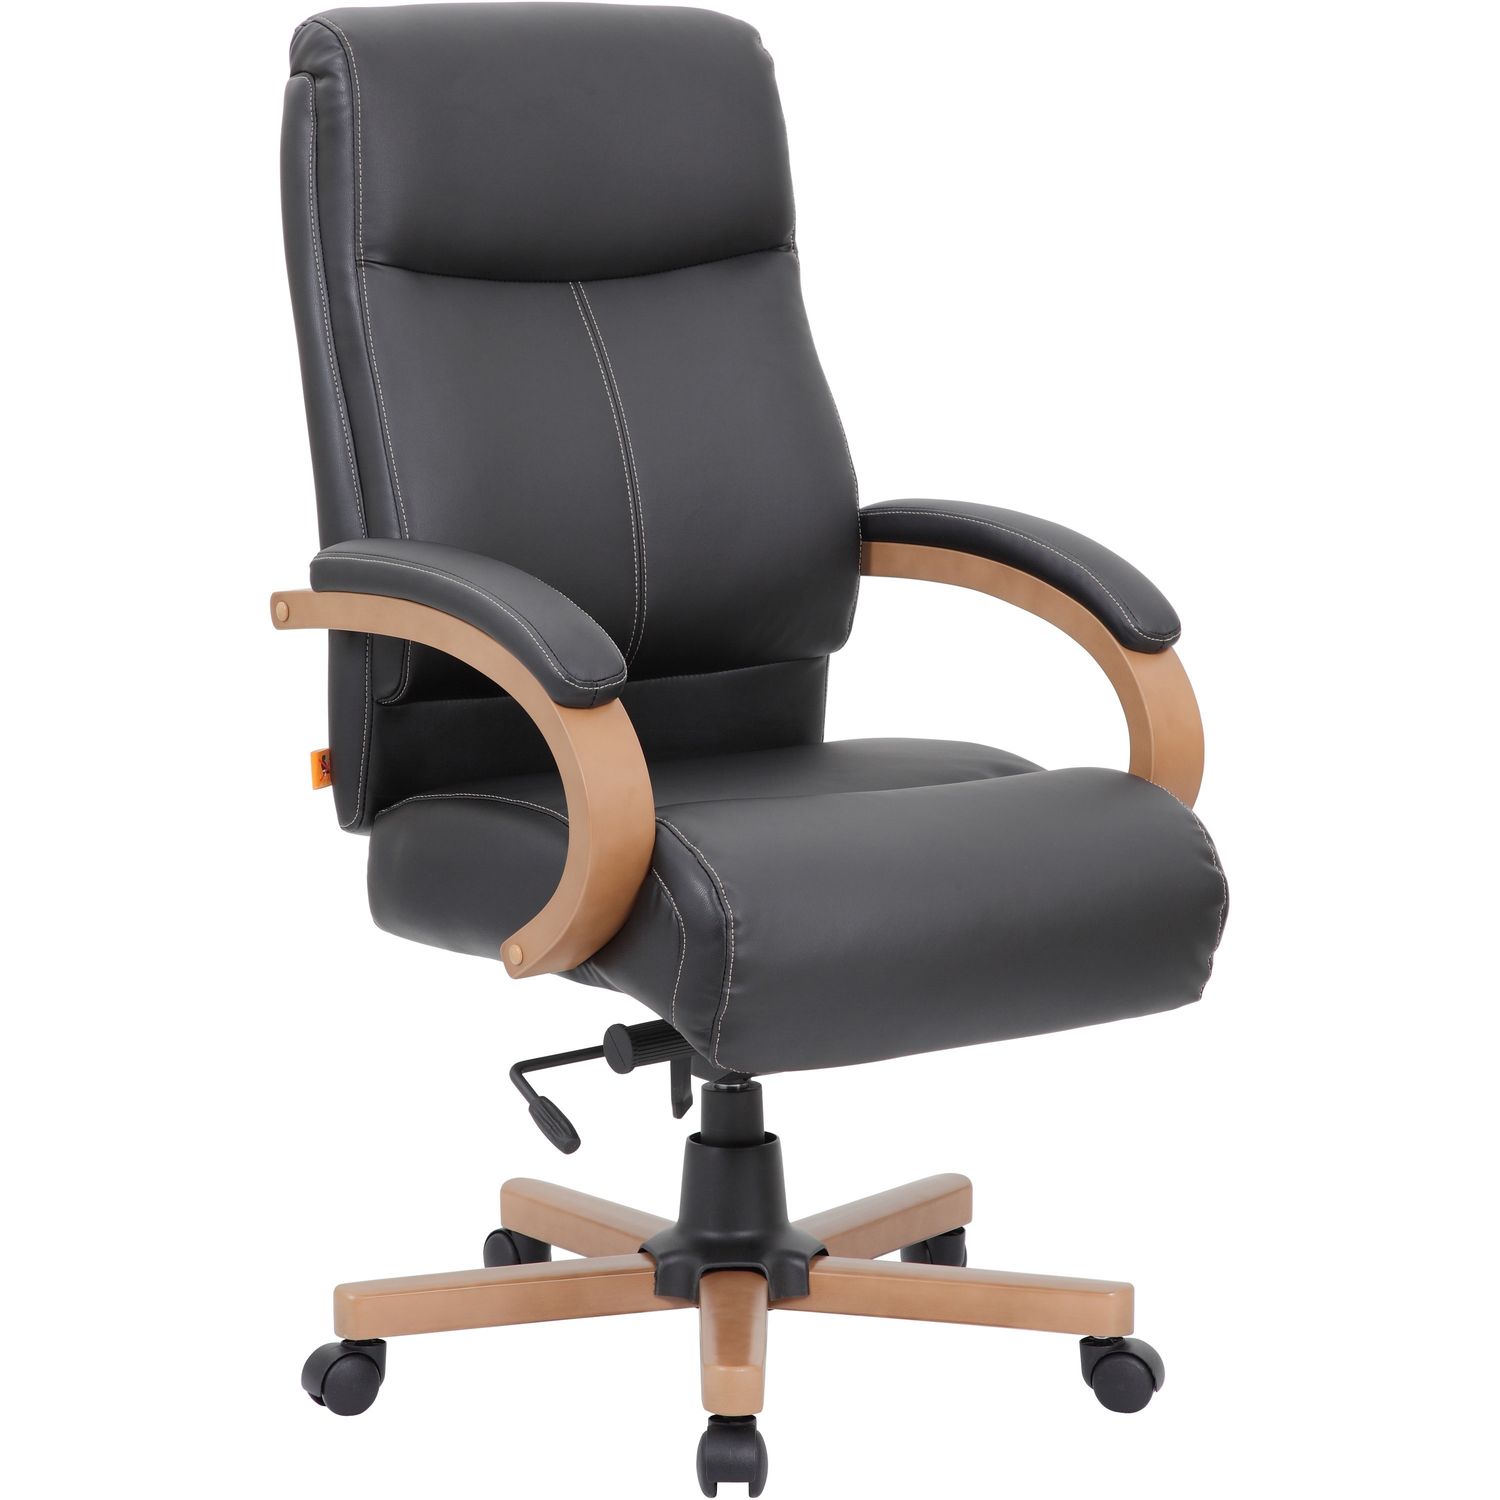 Executive Chair Black Leather Seat, Black Leather Back, High Back, 1 Each